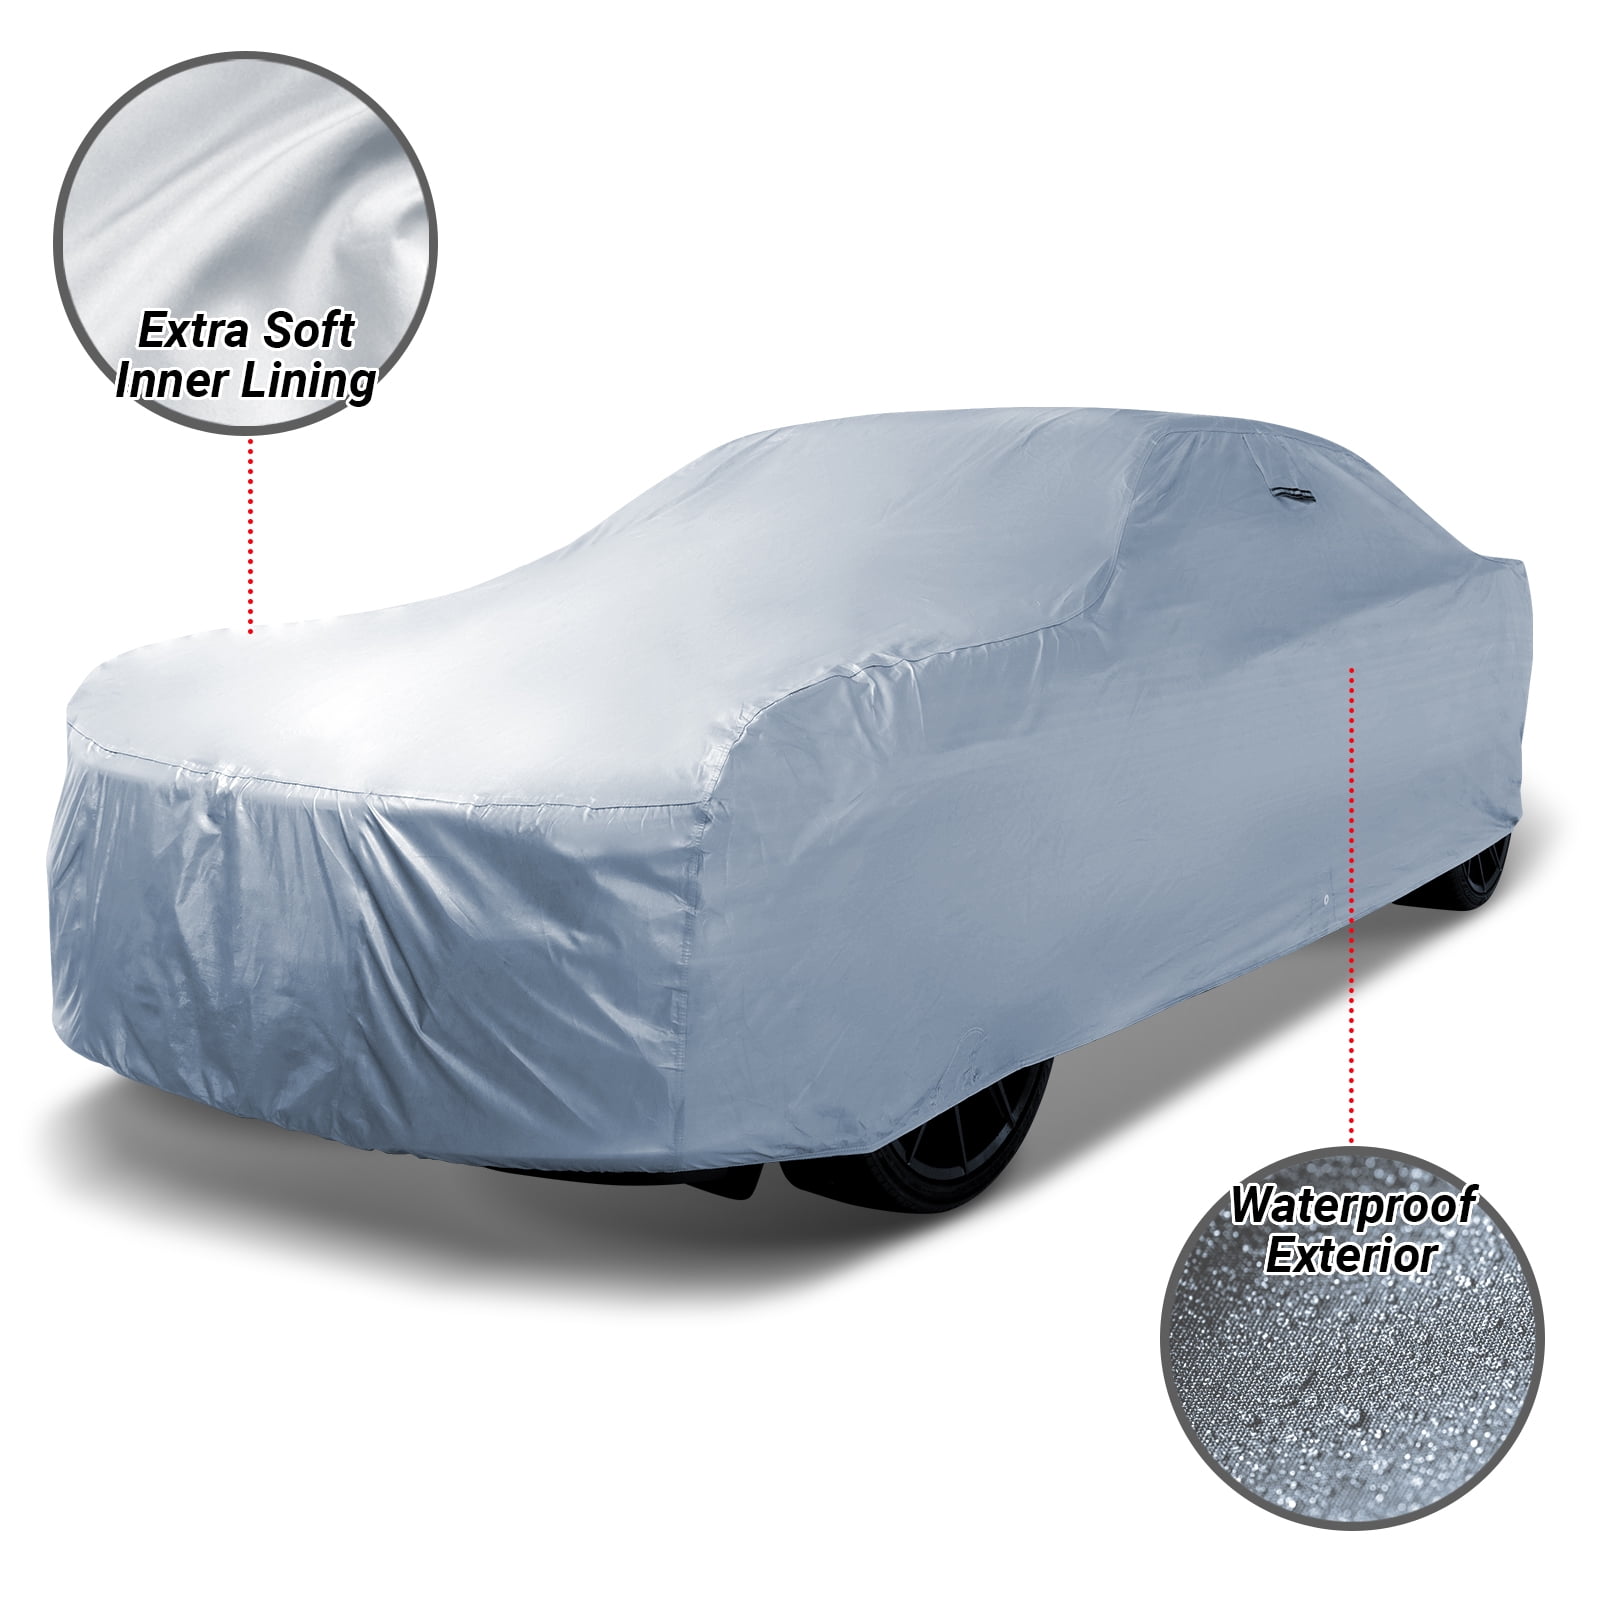 FrostGuard Deluxe Full-Coverage Car Windshield Cover, Snowflake, 41 x 68  inches 